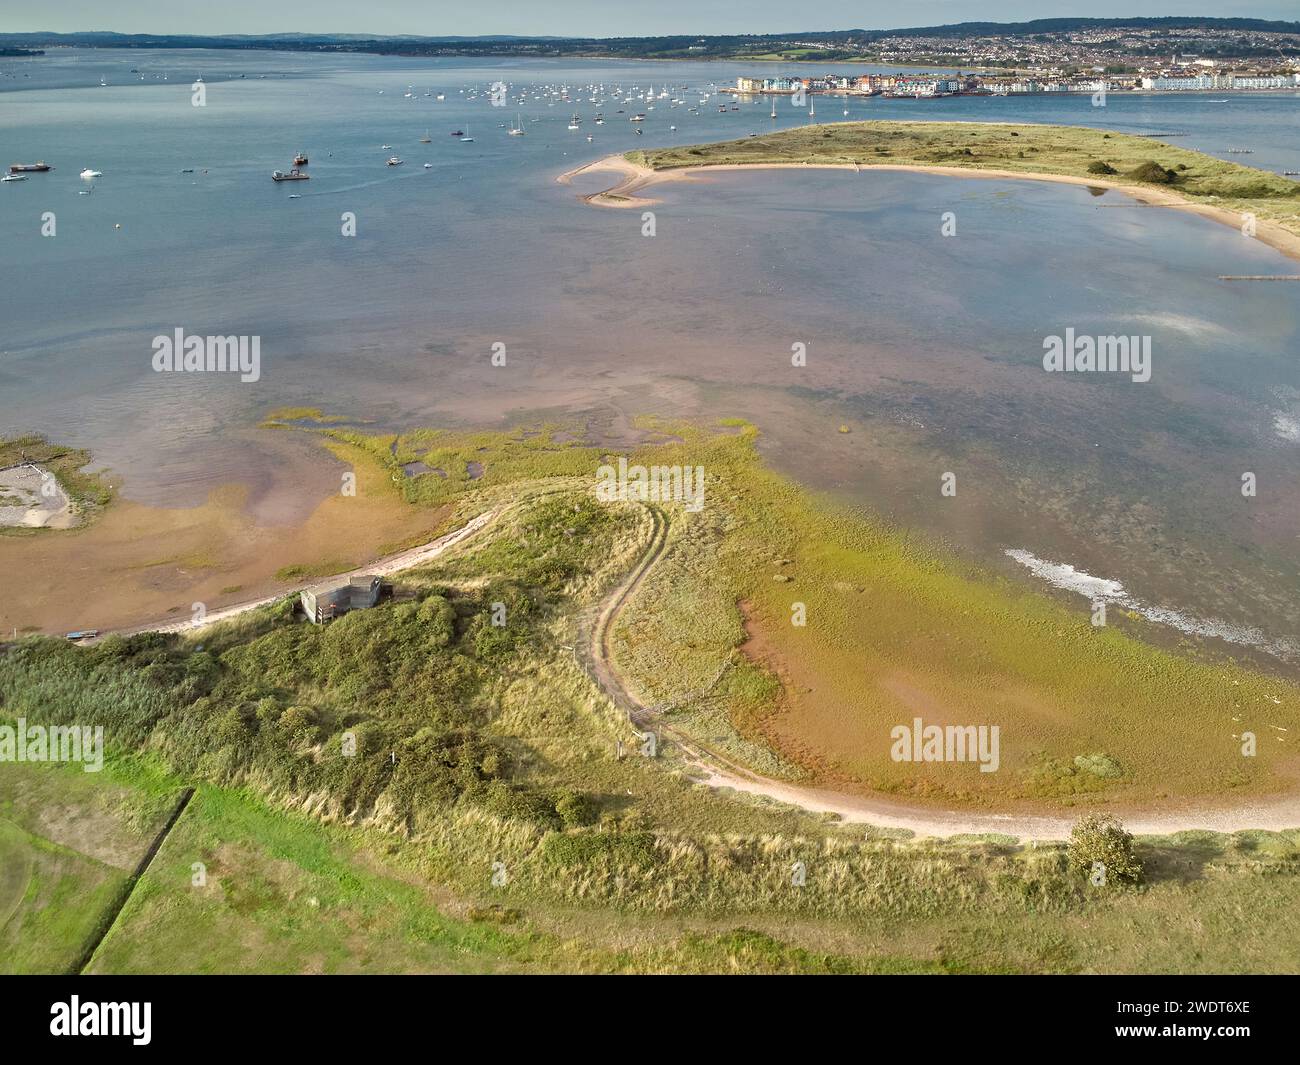 Aerial view of the mouth of the River Exe, seen from above Dawlish Warren and looking towards the town of Exmouth, Devon, England, United Kingdom Stock Photo